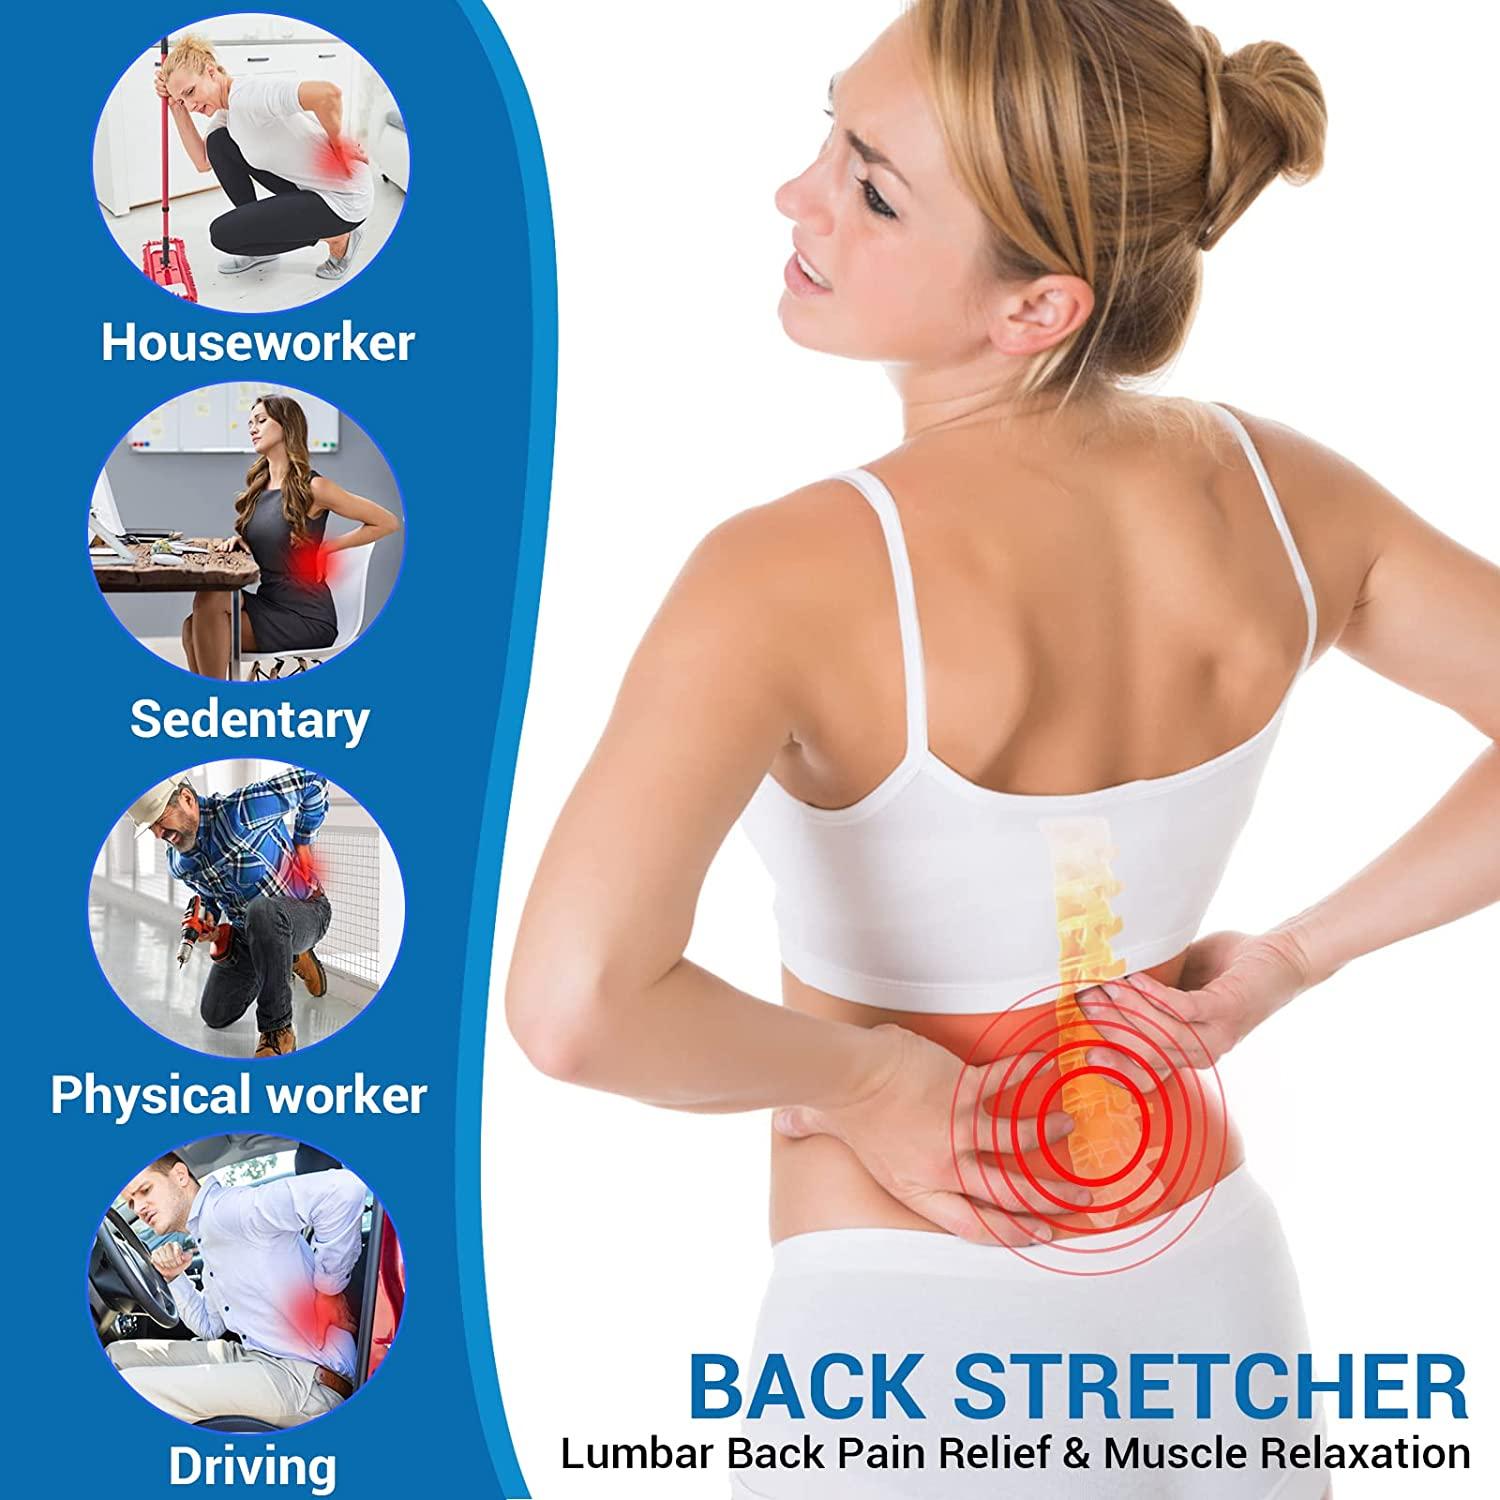 Back Stretcher, Lumbar Back Pain Relief Device, Multi-Level Back Massager  Lumbar, Back Stretcher For Lower Back Pain Relief For Herniated Disc,  Sciatica, Lower And Upper Back Stretcher Support 